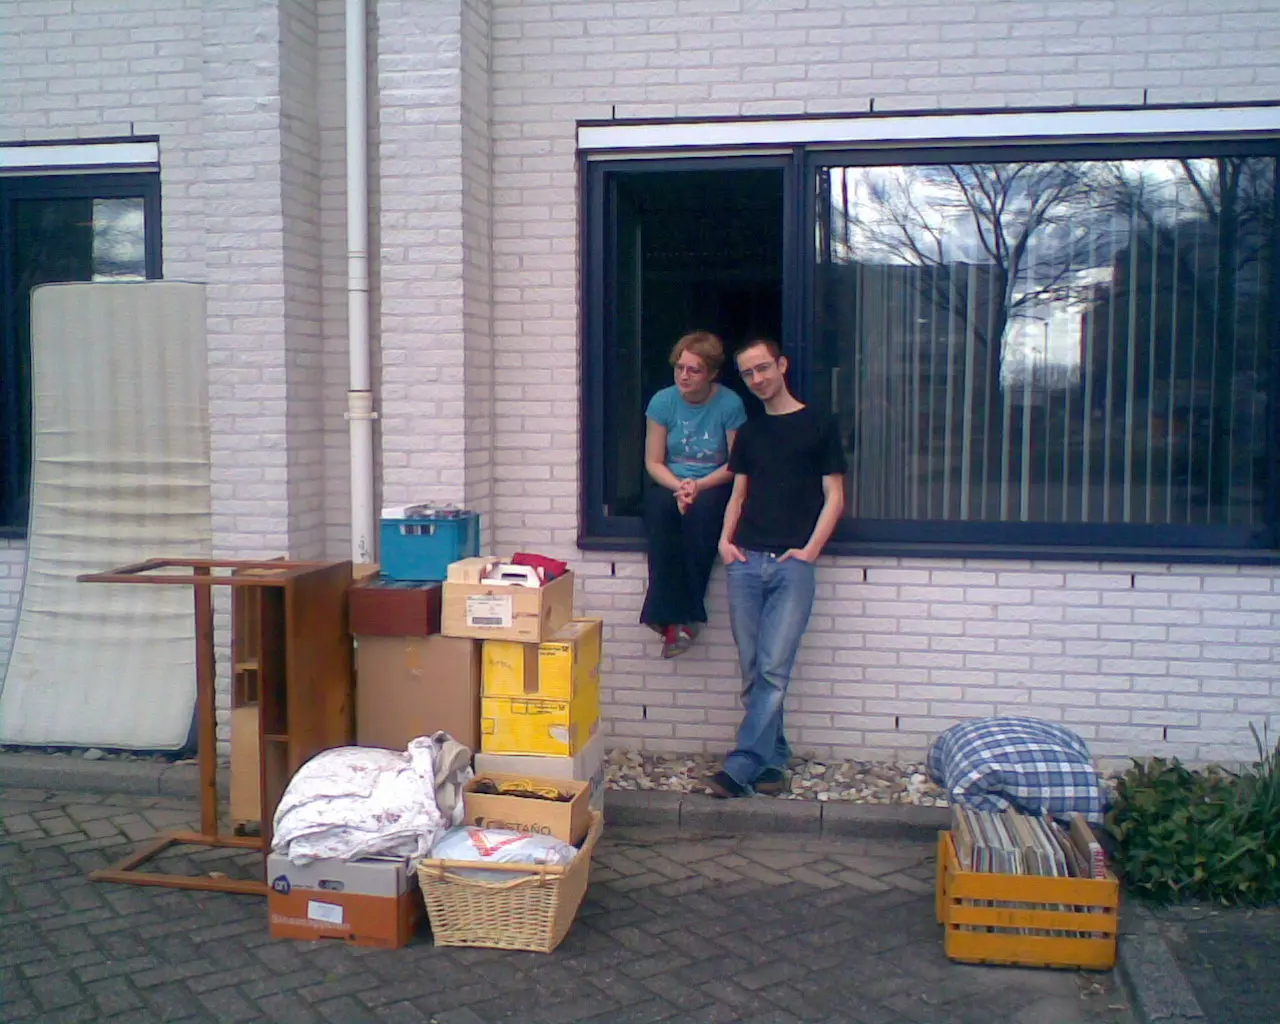 A woman and a man together lift a large removal box